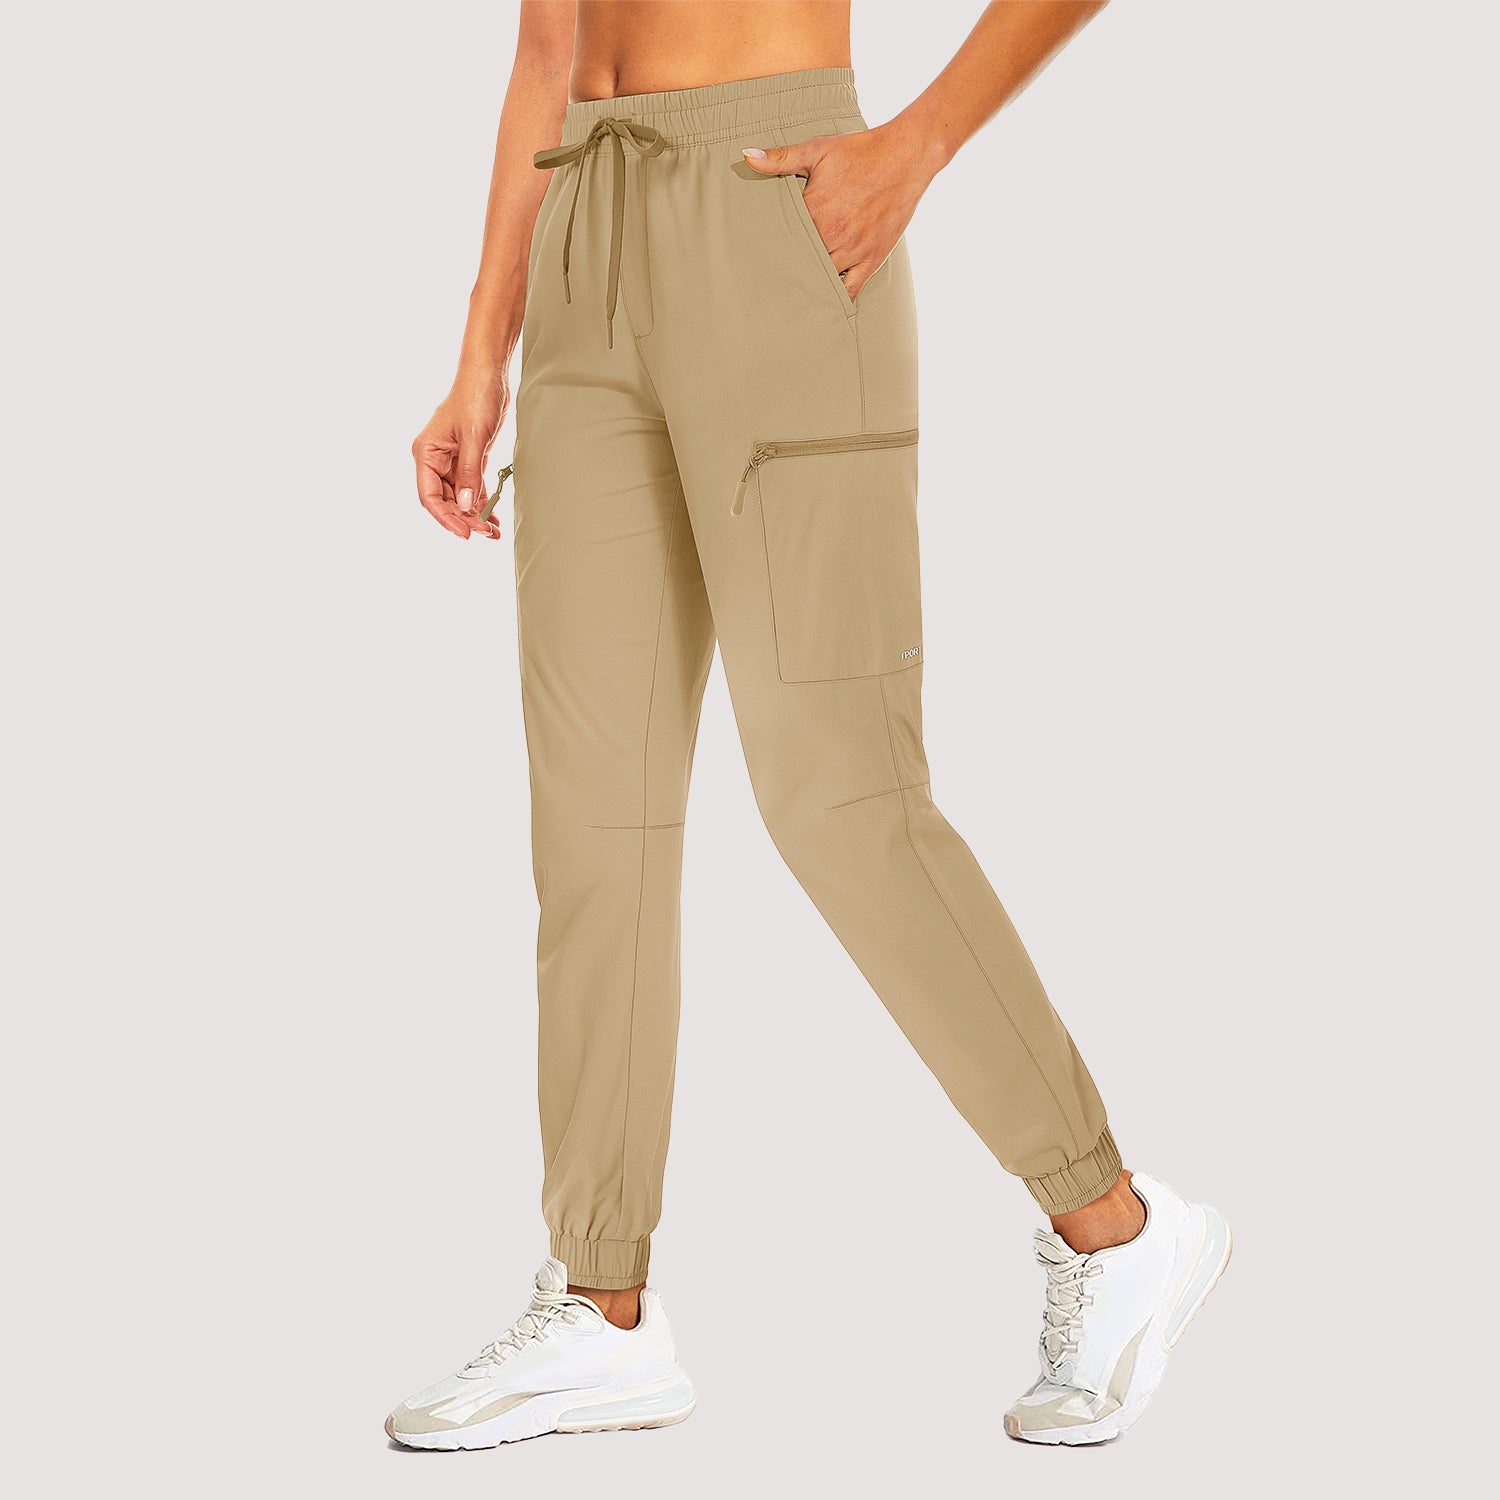 Women's Hiking Pants with 5 Pockets Quick Dry Lightweight Joggers